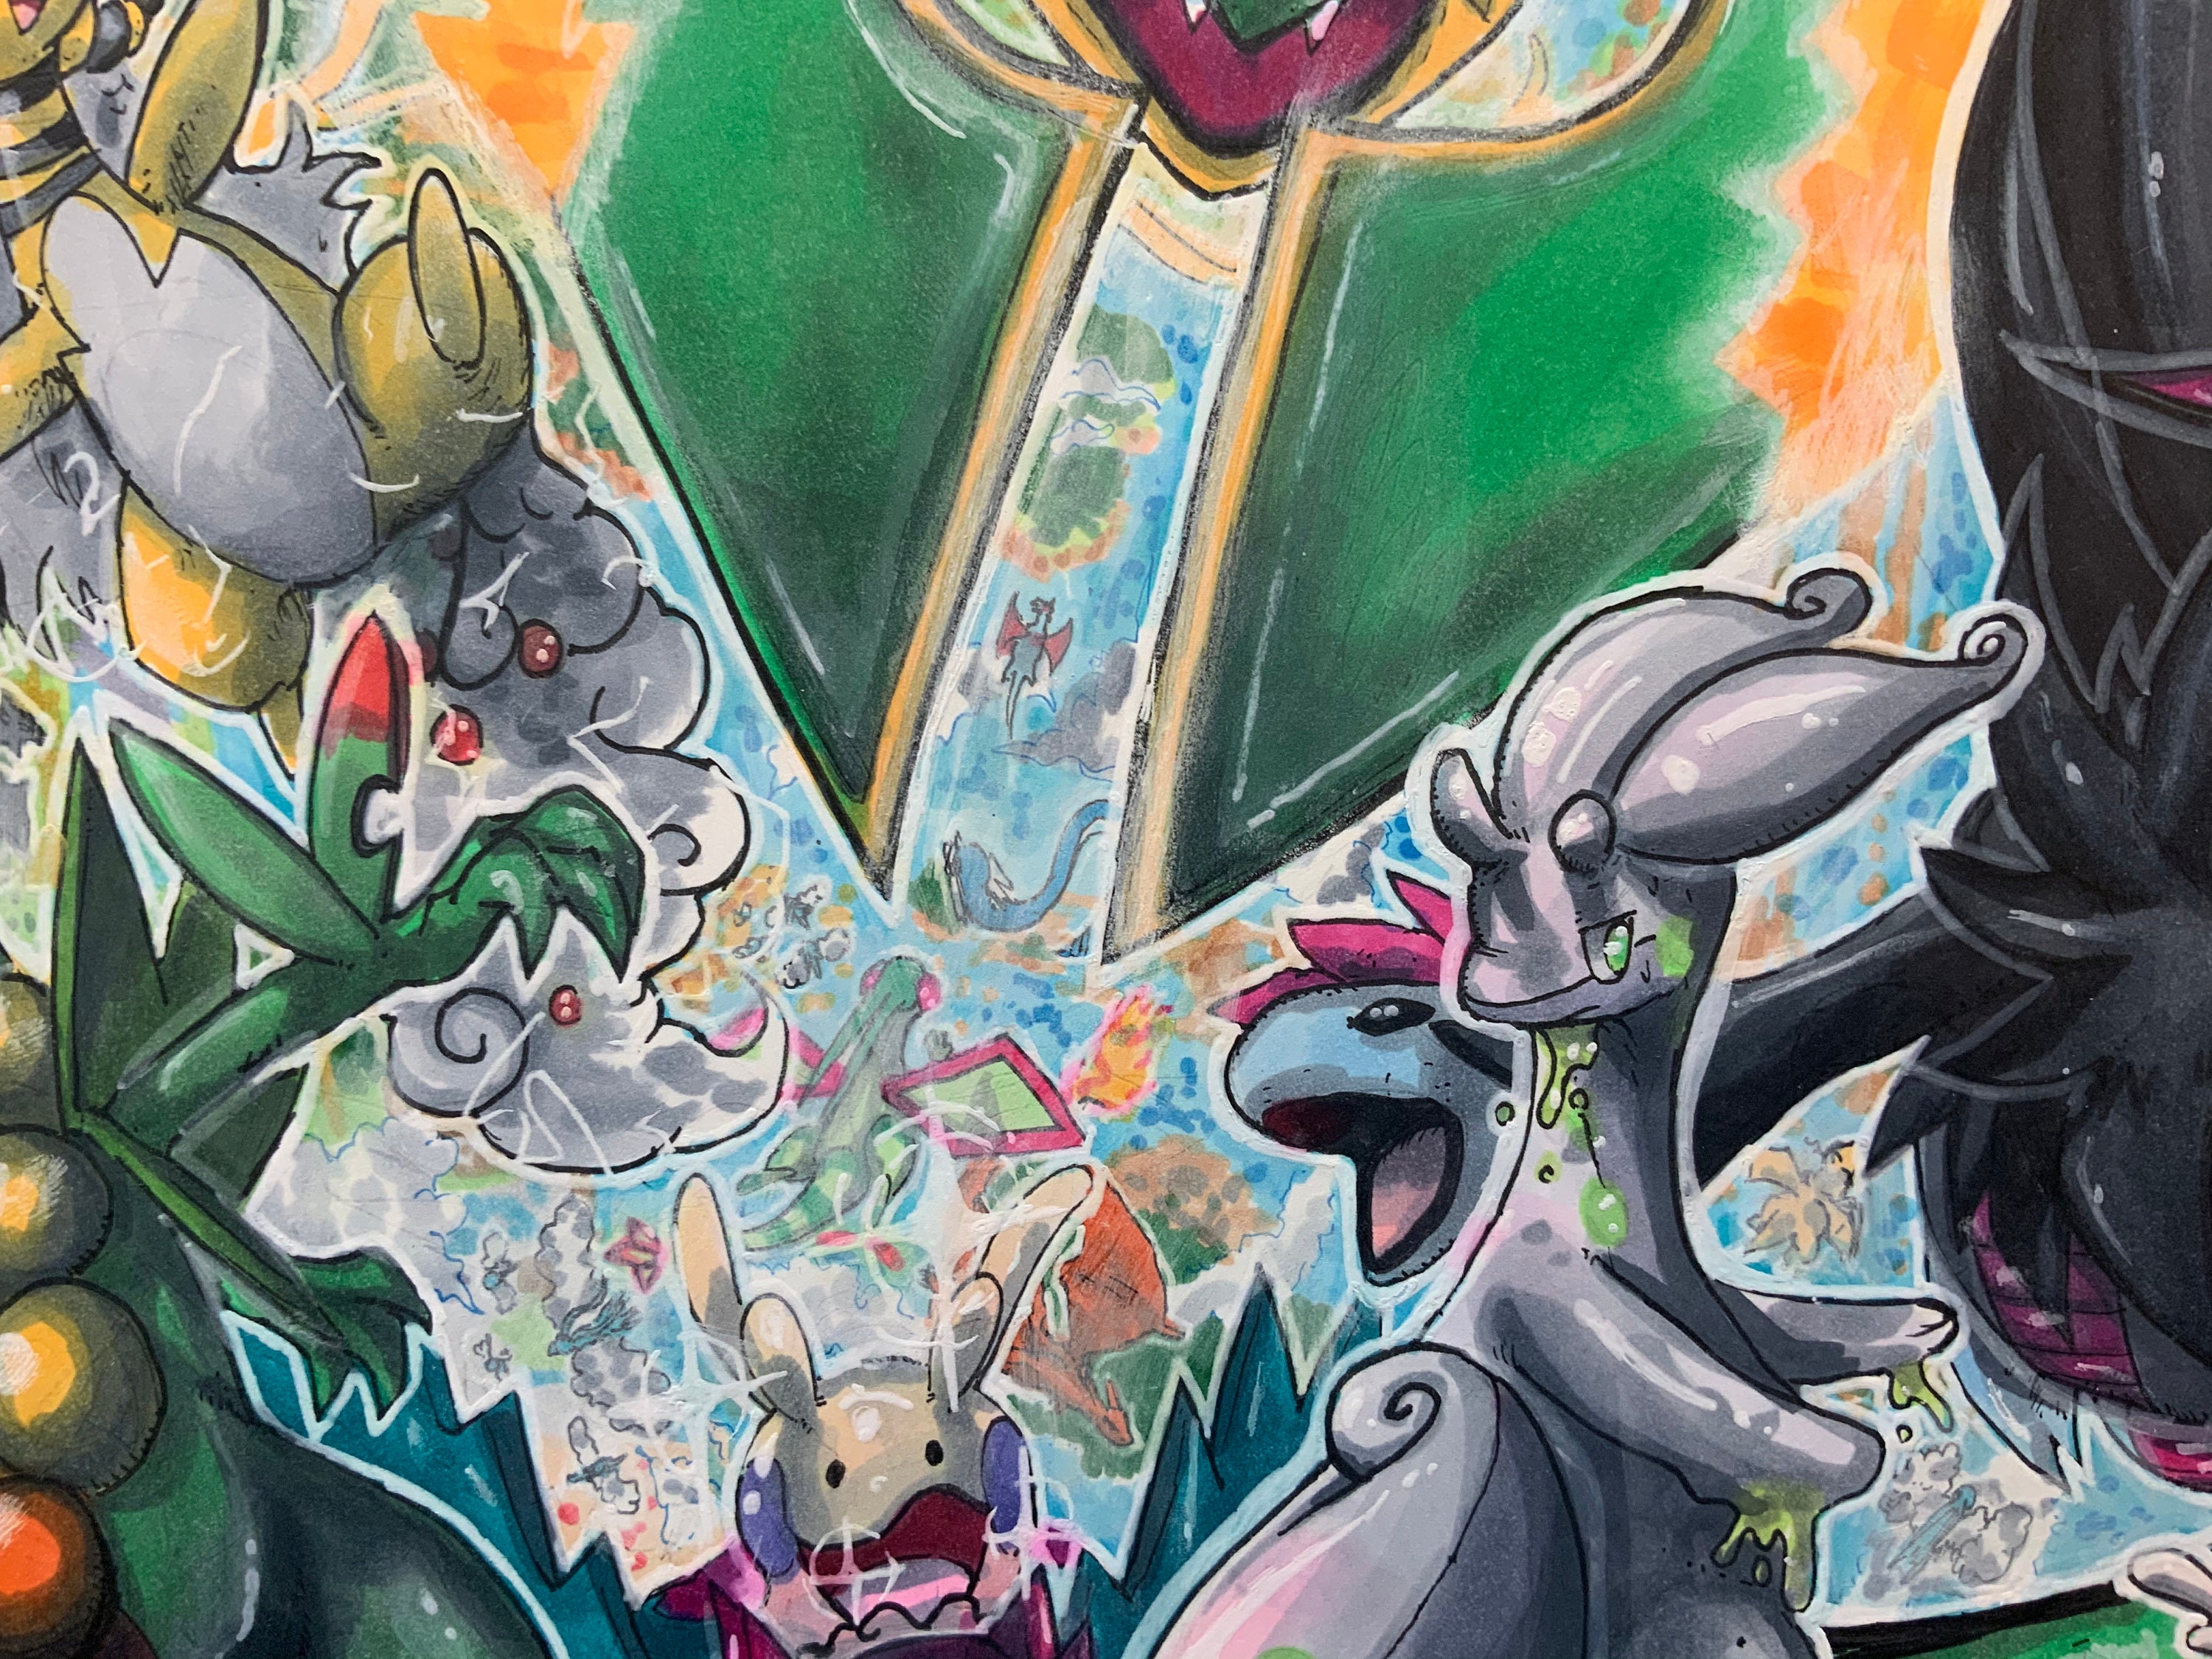 11x14 Print of Yveltal and Mega Rayquaza -  Sweden